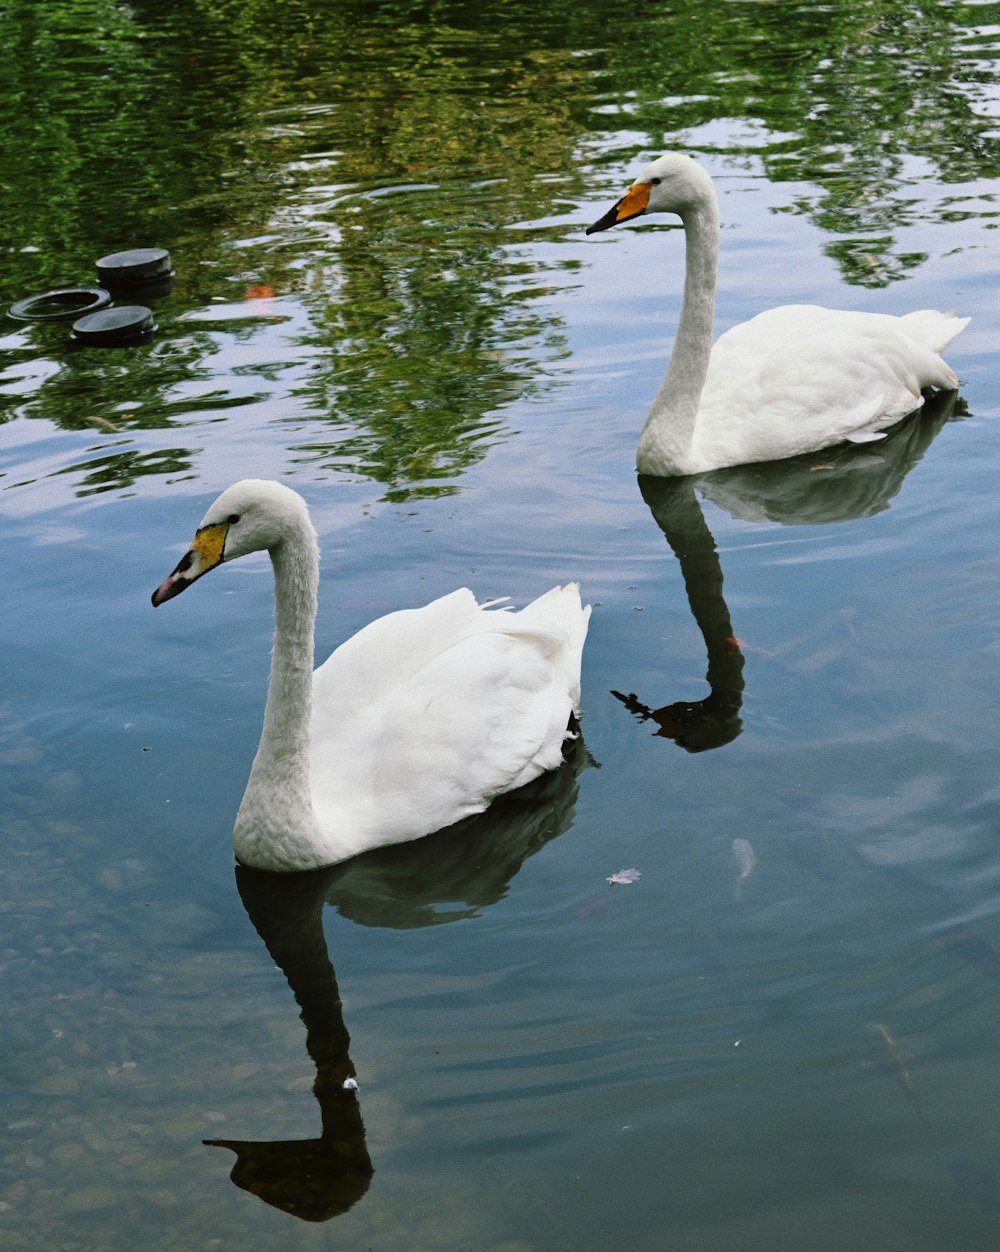 two white swans are swimming in a pond